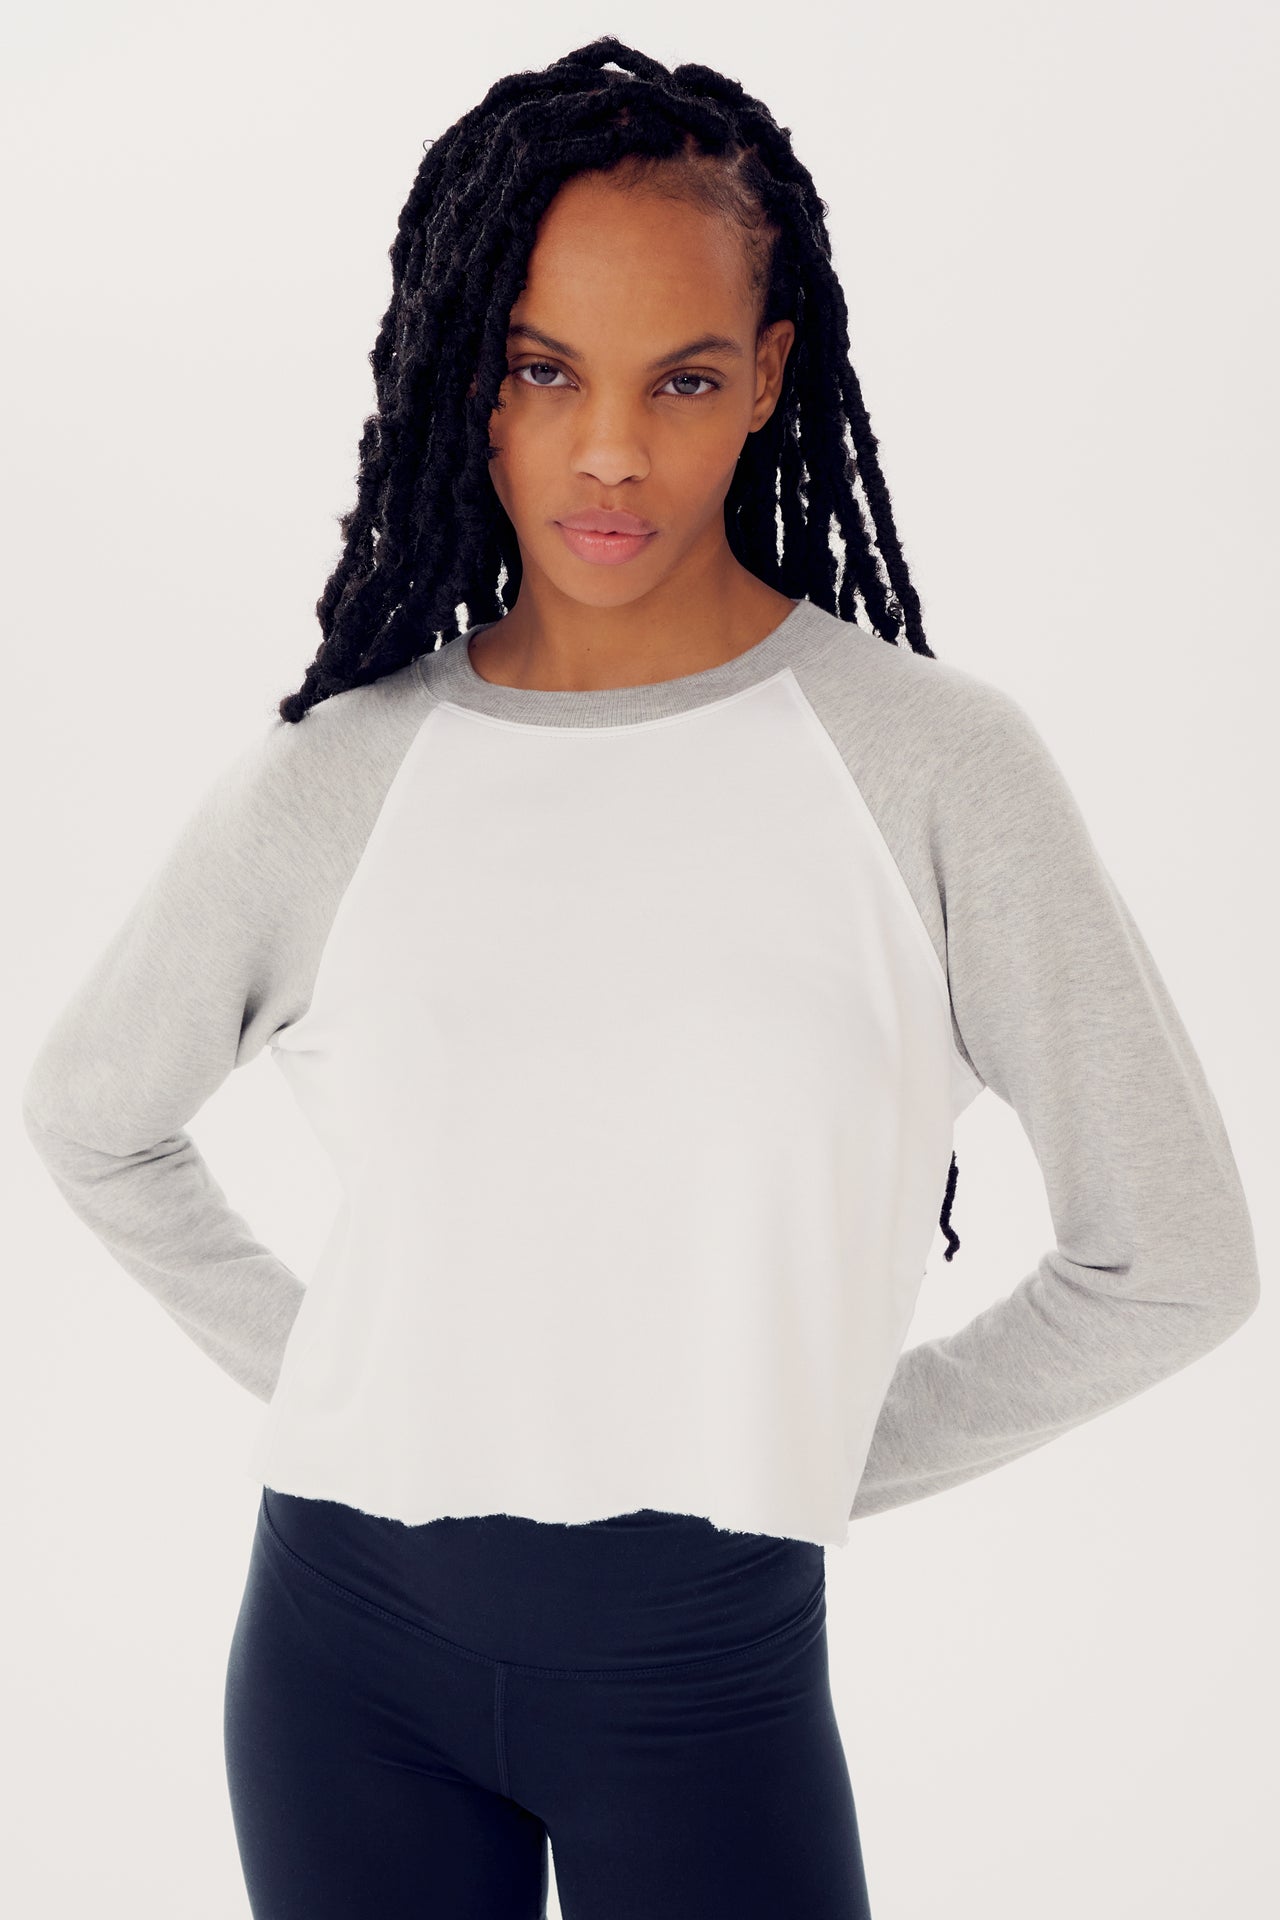 A woman with long braids wearing a SPLITS59 Warm Up Crop Fleece Sweatshirt in Heather Grey/White and black leggings, standing with hands on hips and looking at the camera.